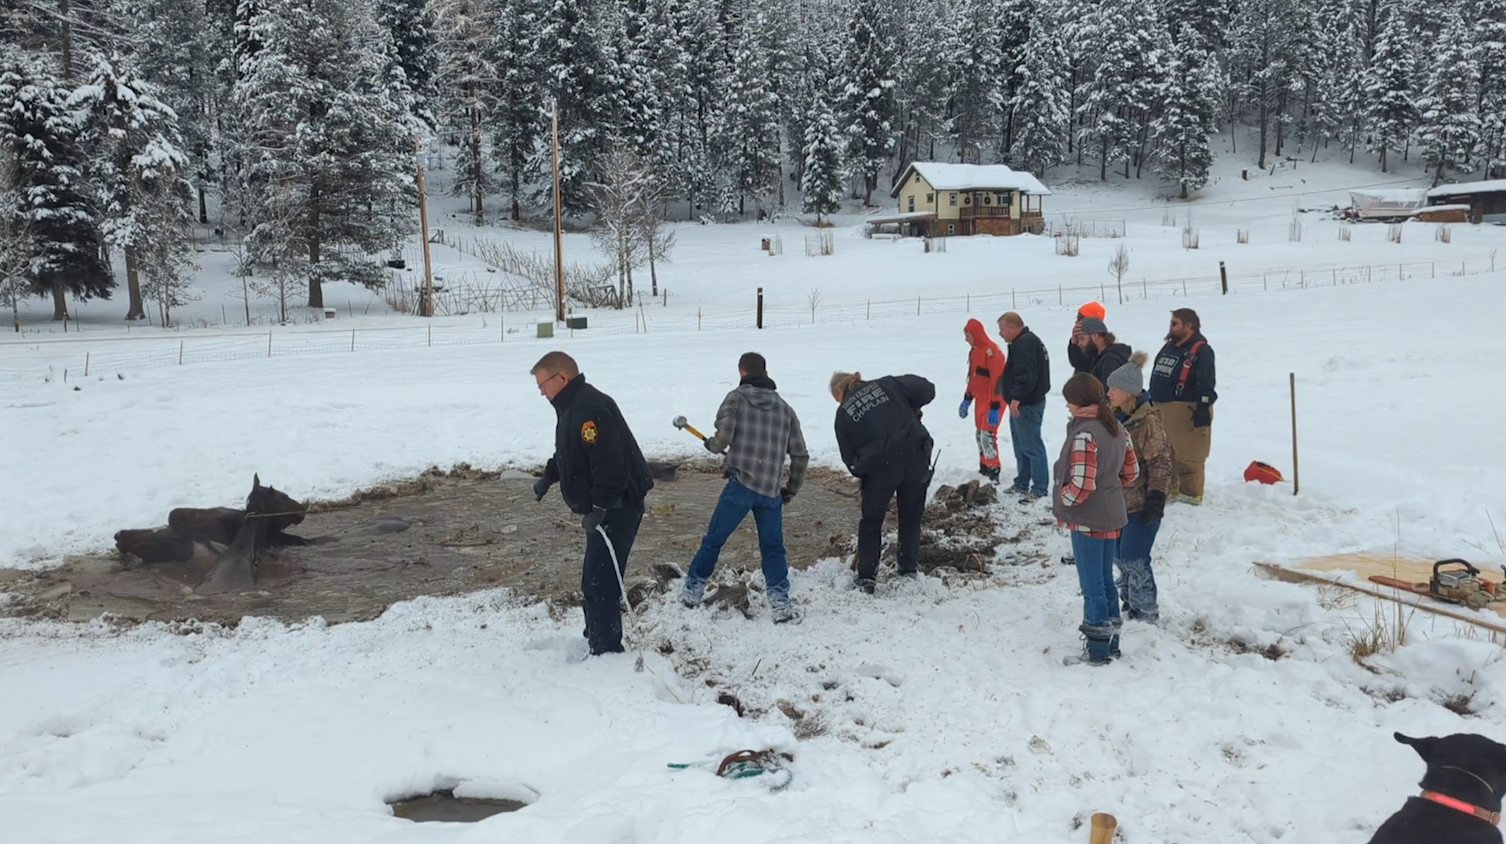 Horses fell in a frozen Montana pond. Neighbors raced to save them